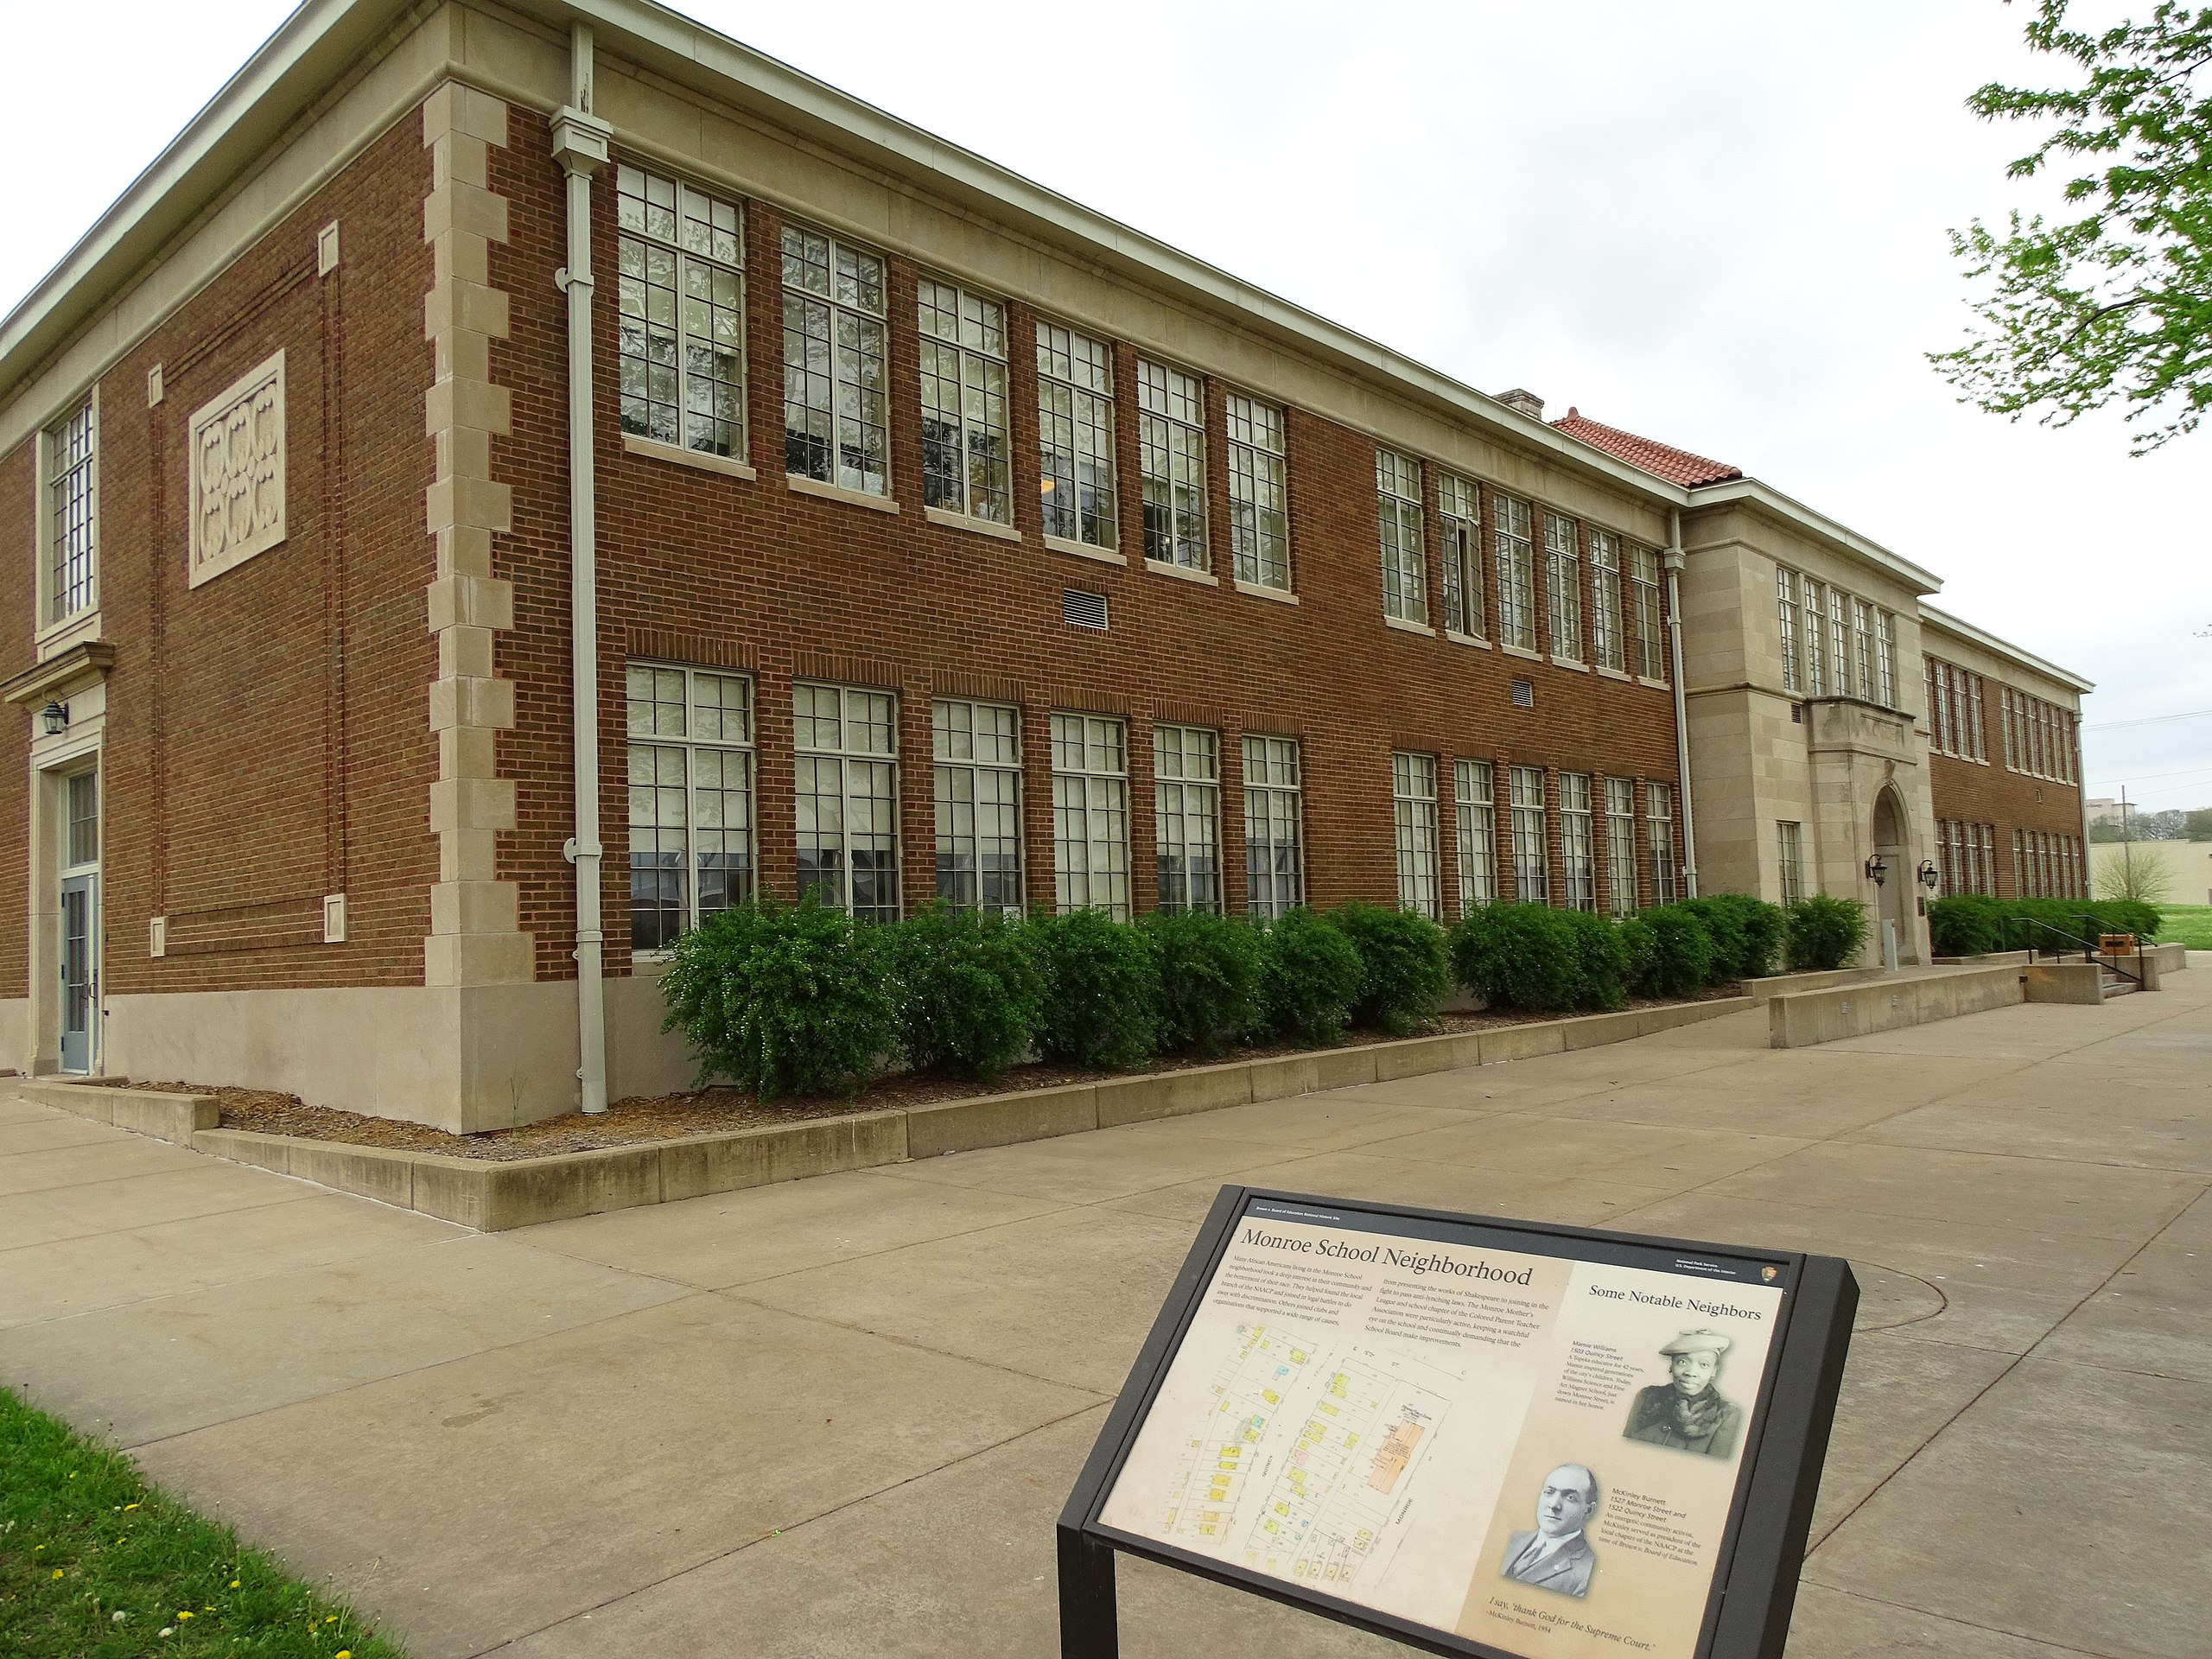 Monroe Elementary School is a national historic site as part of Brown v. Board of Education | National Parks Near Kansas City